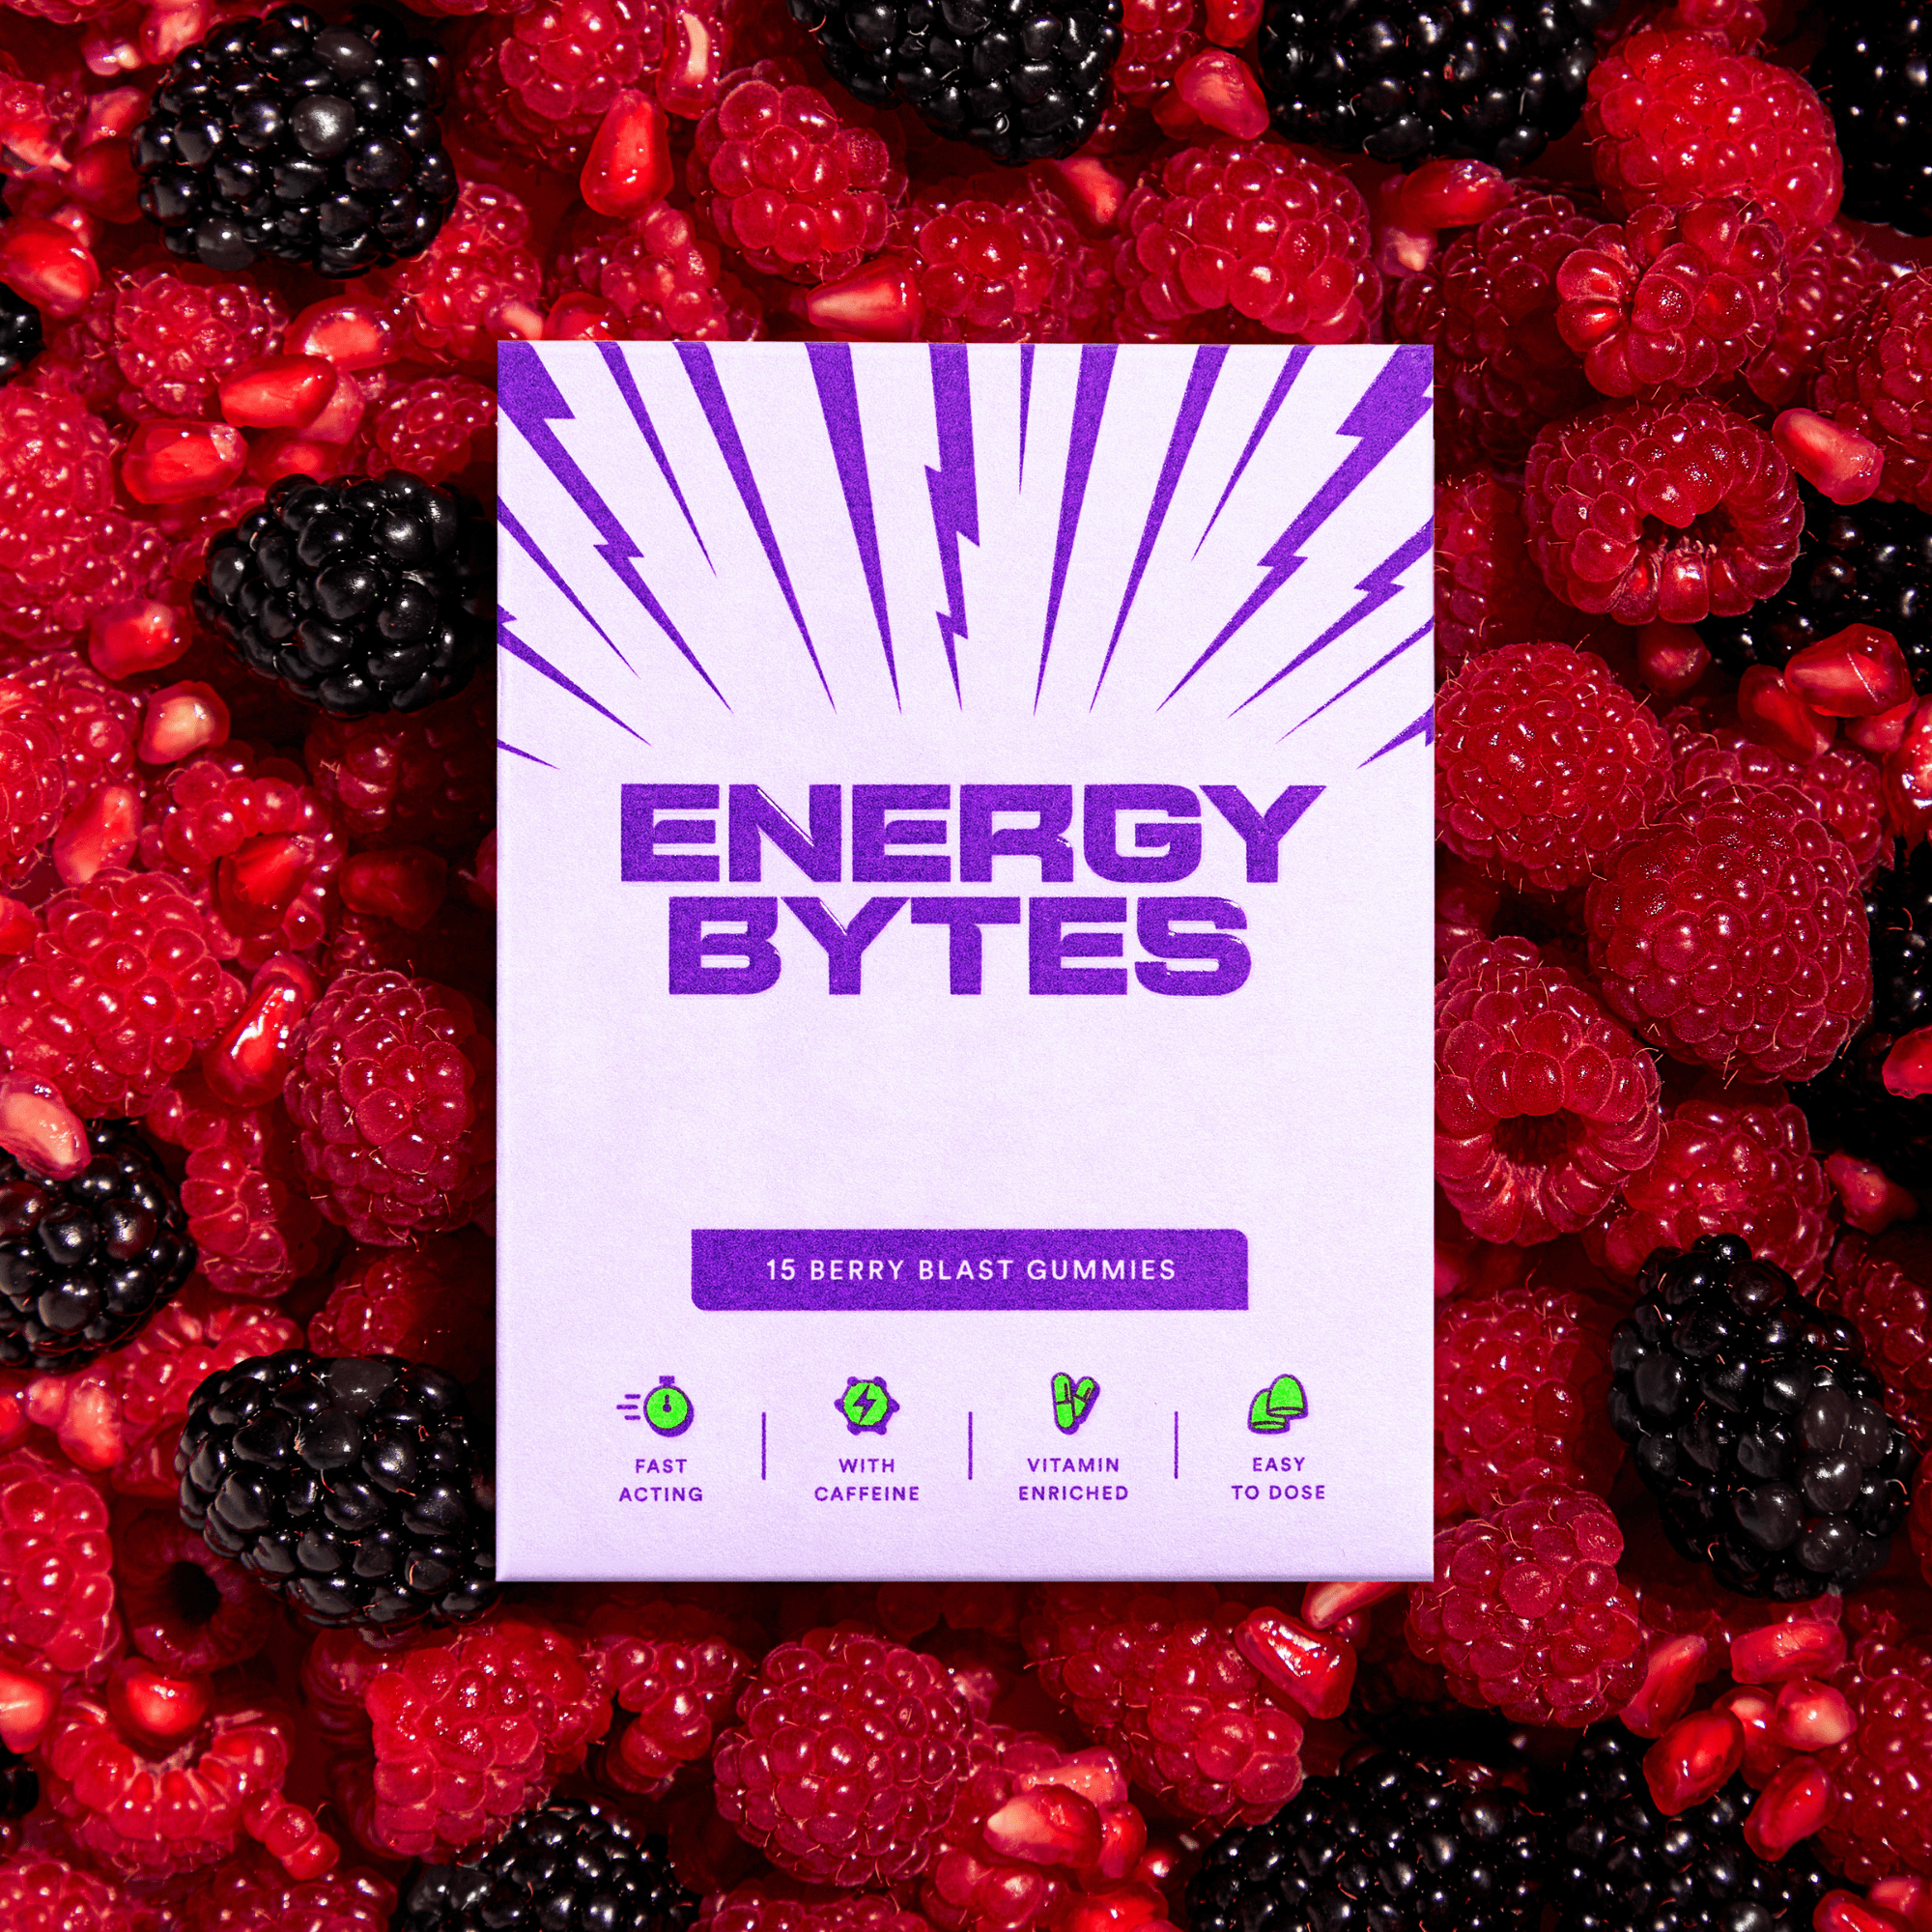 Energy Bytes Berry Blast Gummies package with purple accents, nestled in a mix of ripe blackberries and raspberries, featuring the natural berry essence and vitality enhancement.